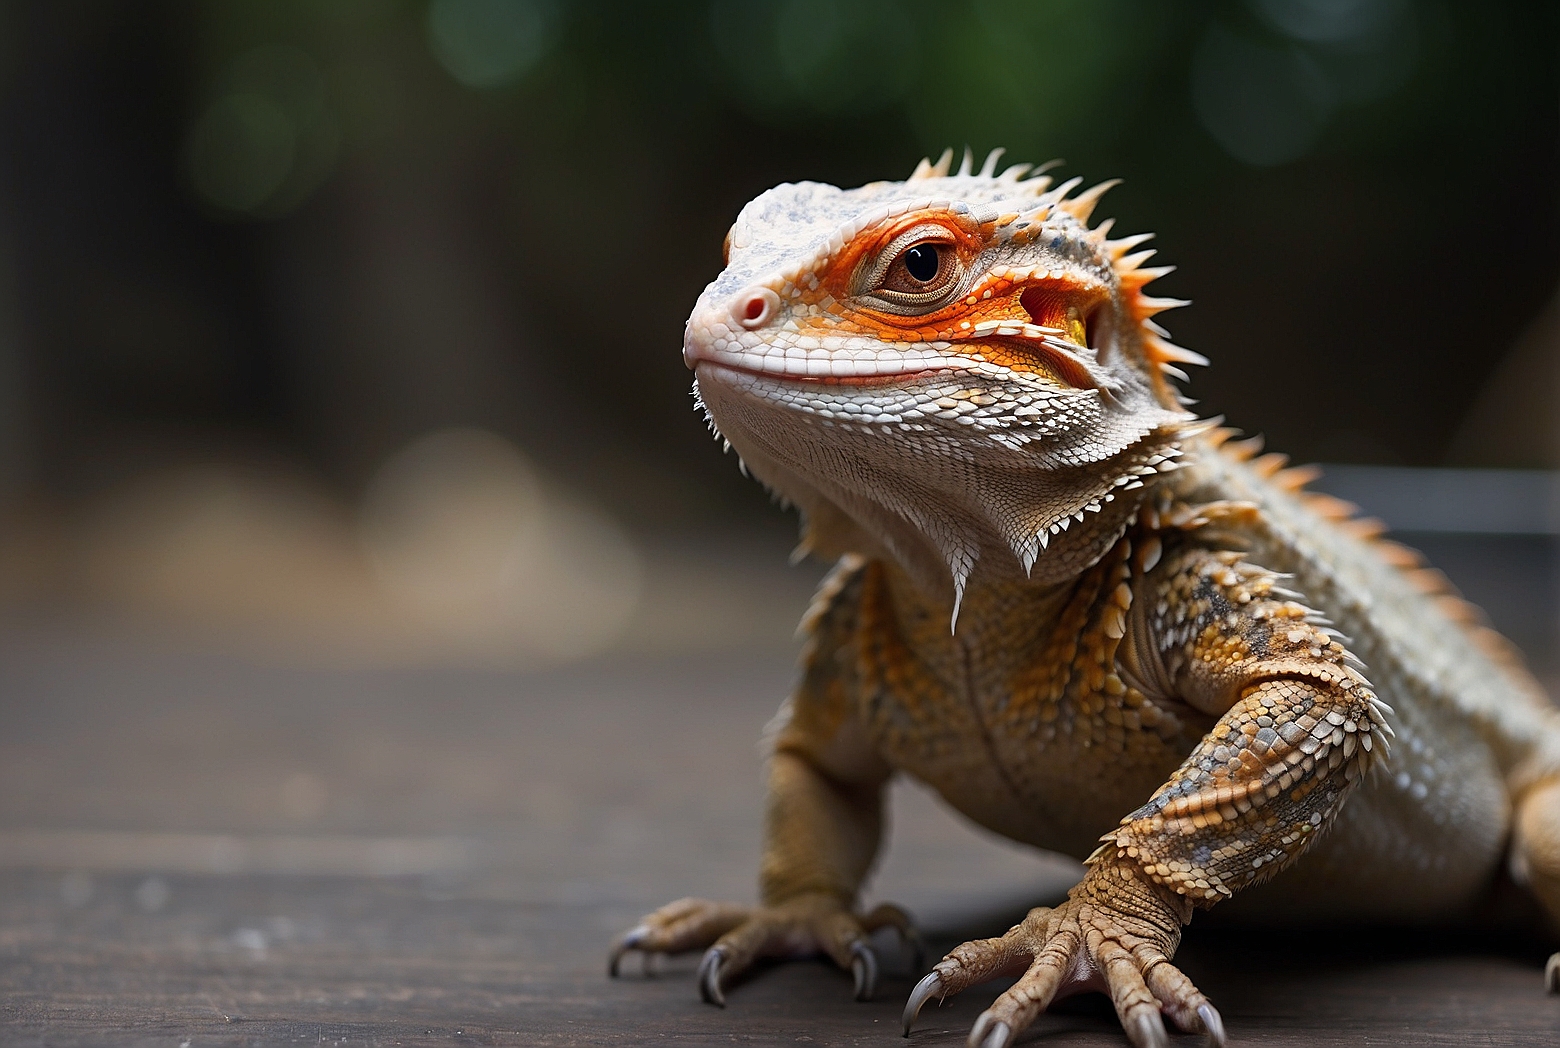 Why Does My Bearded Dragon Feel Threatened By Me?